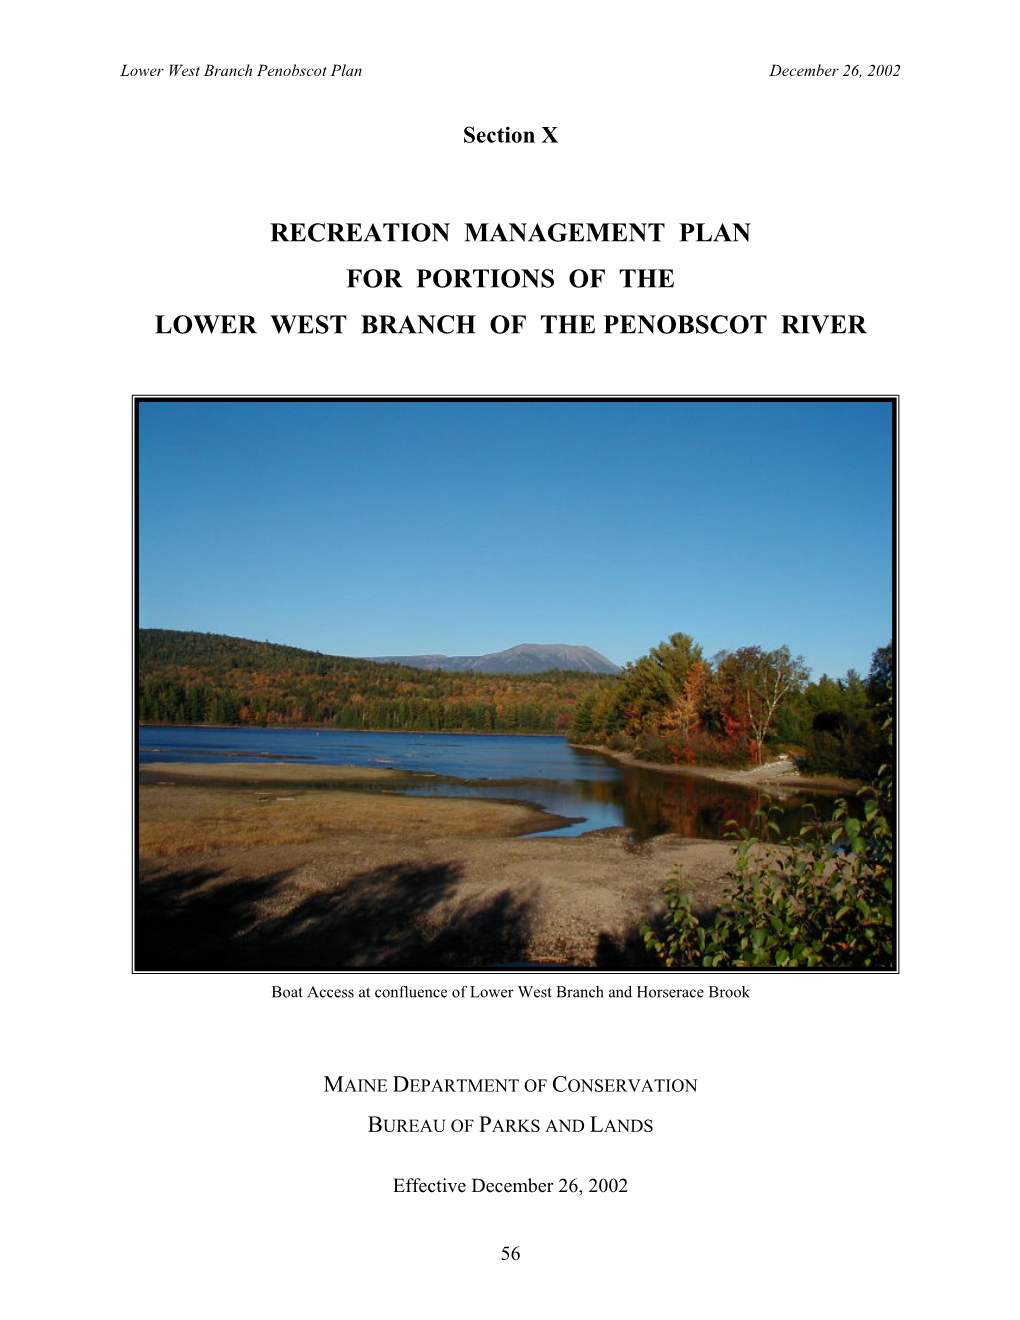 Recreation Management Plan for Portions of the Lower West Branch of the Penobscot River